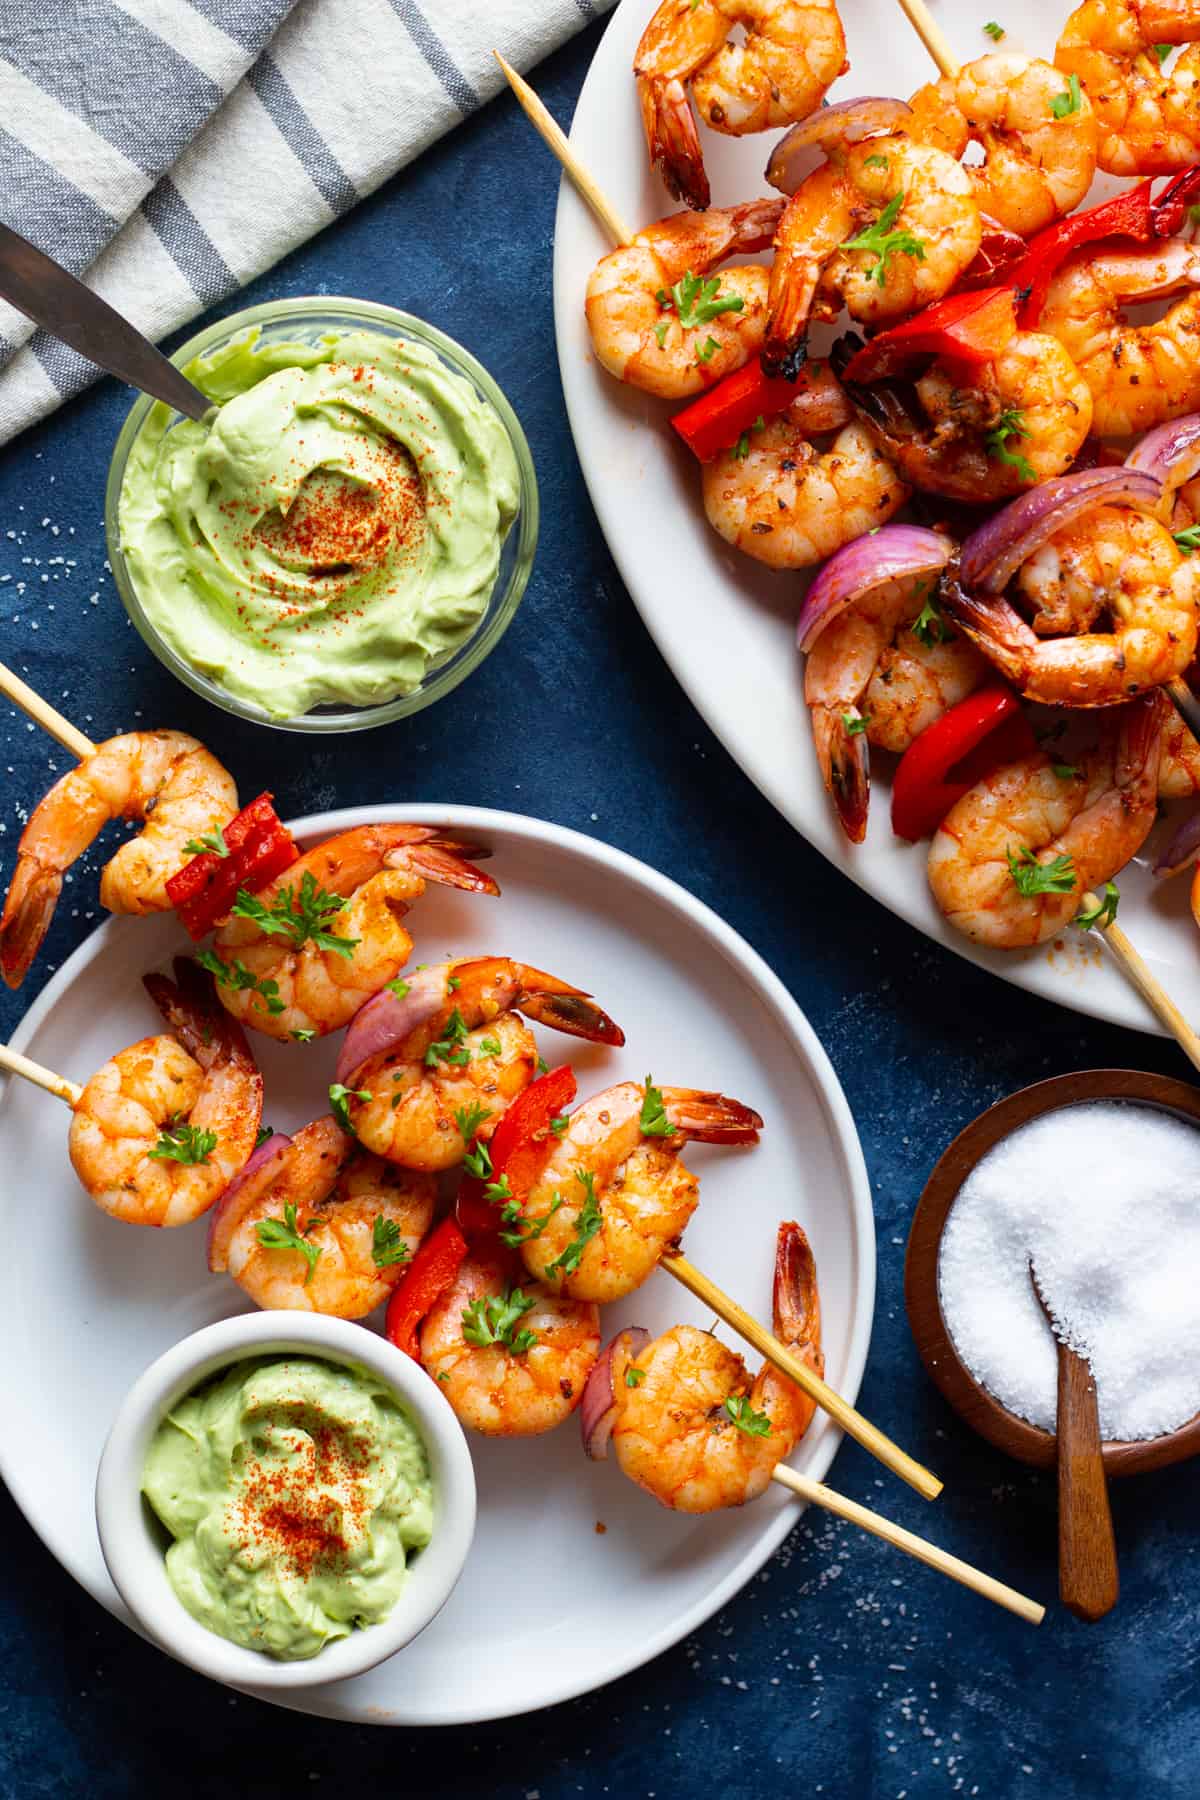 These are made with shrimp marinated in olive oil, smoked paprika, ginger and garlic then grilled until succulent and juicy. Shrimp kabobs are perfect for busy weeknight dinners. Instructions for oven and stove top are included. 